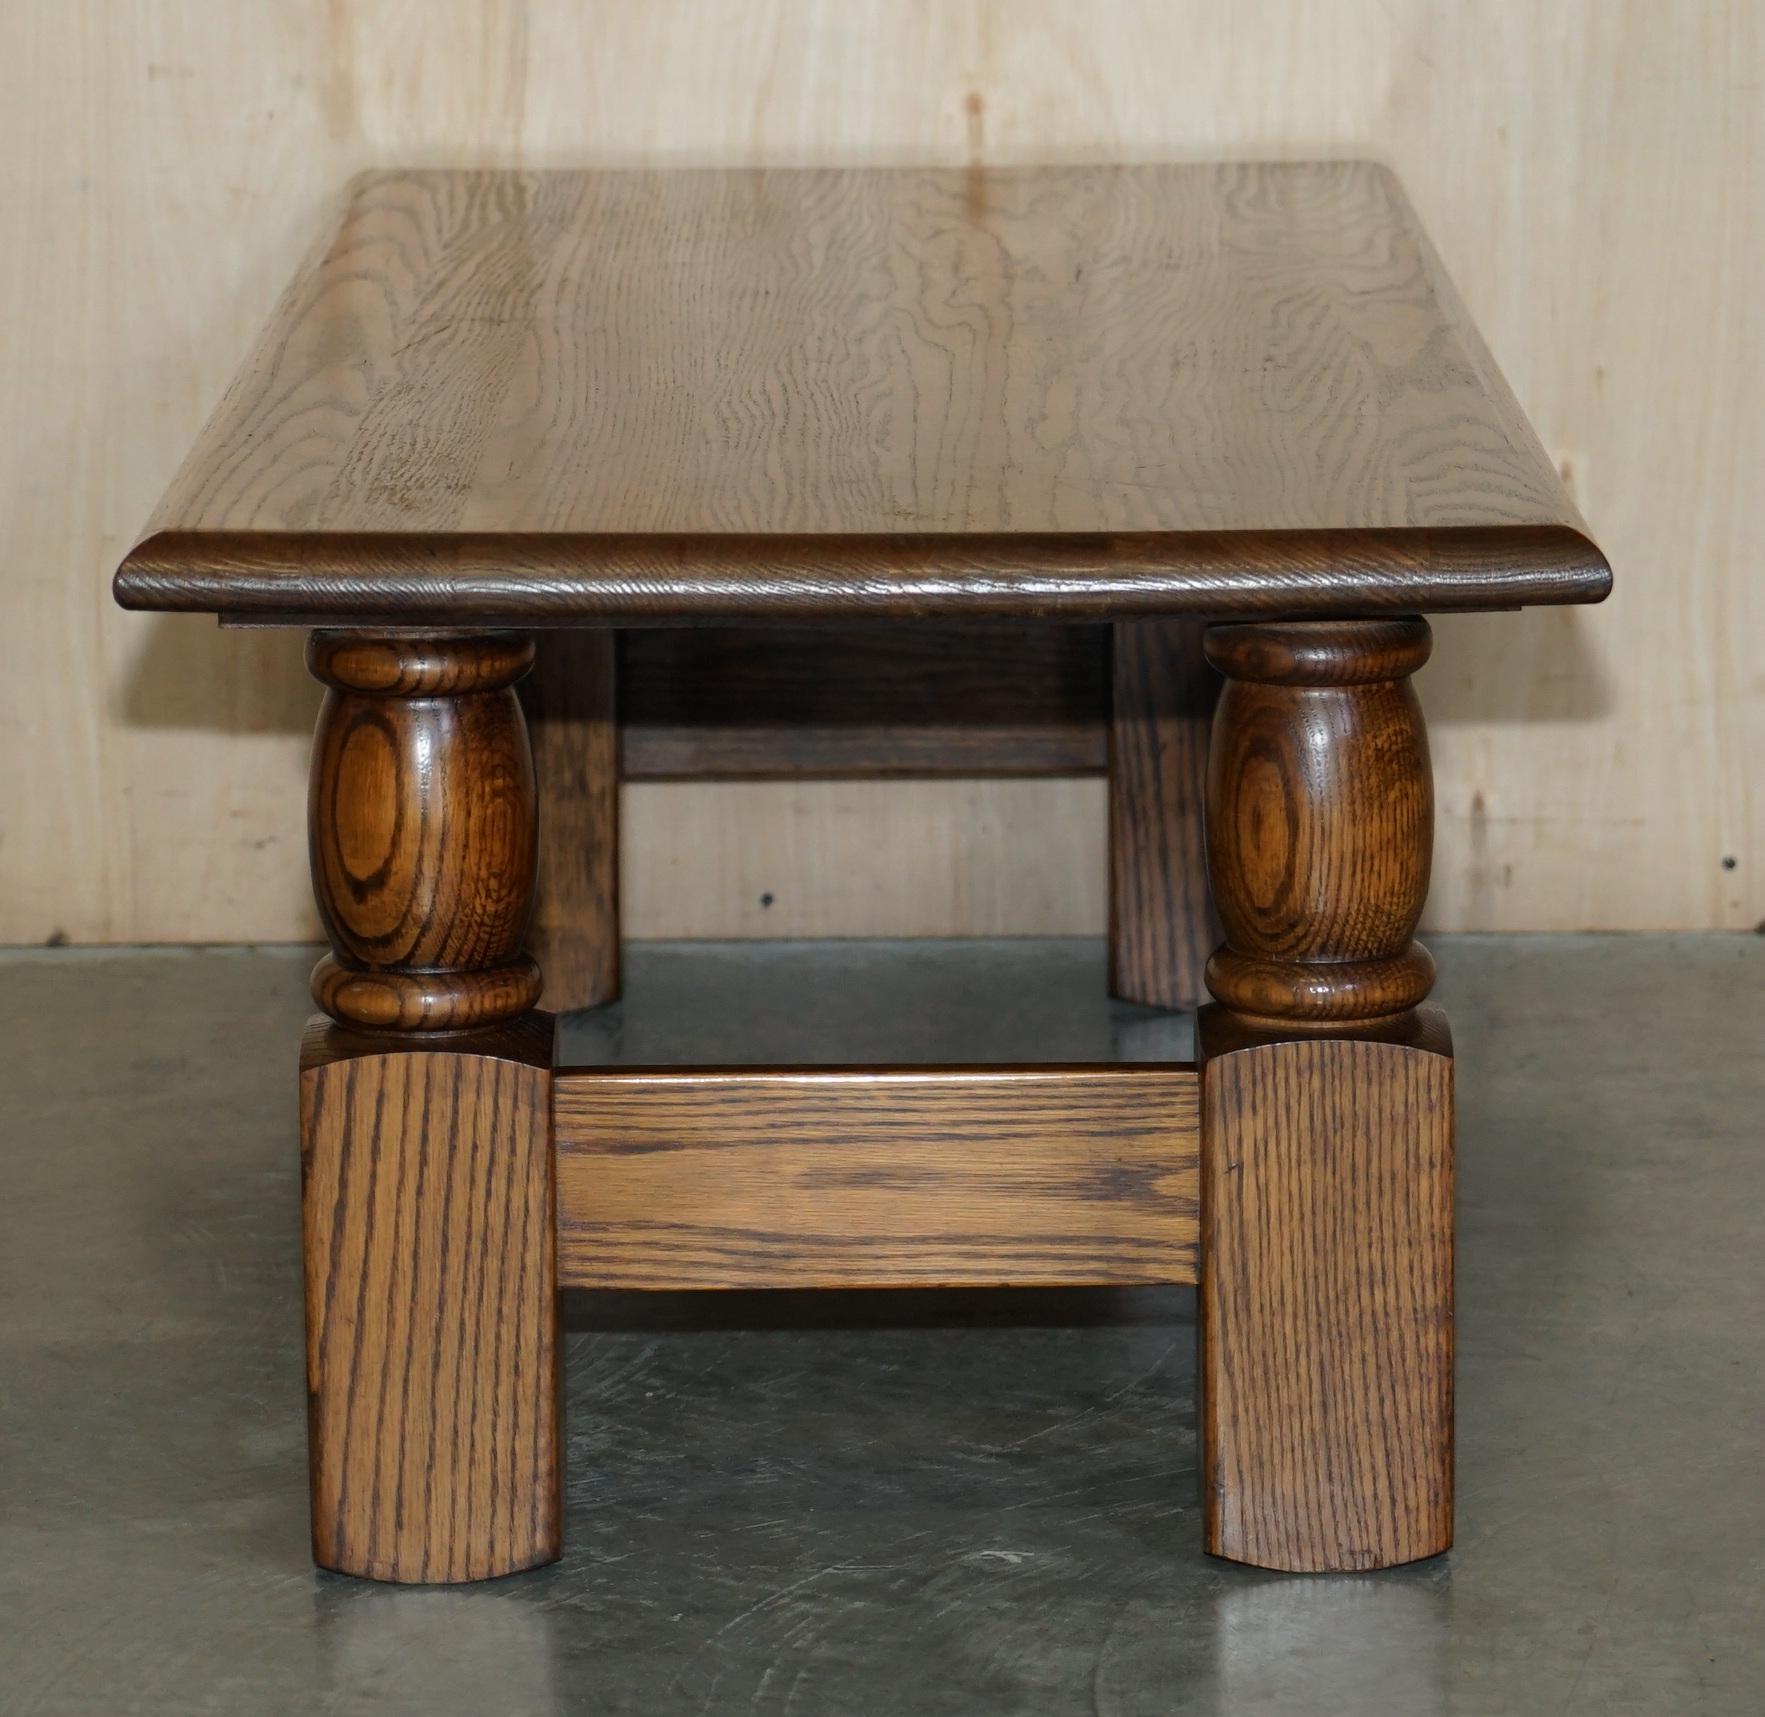 Vintage English Oak Coffee Table Made in the Style of Edwardian Refectory Tables For Sale 7